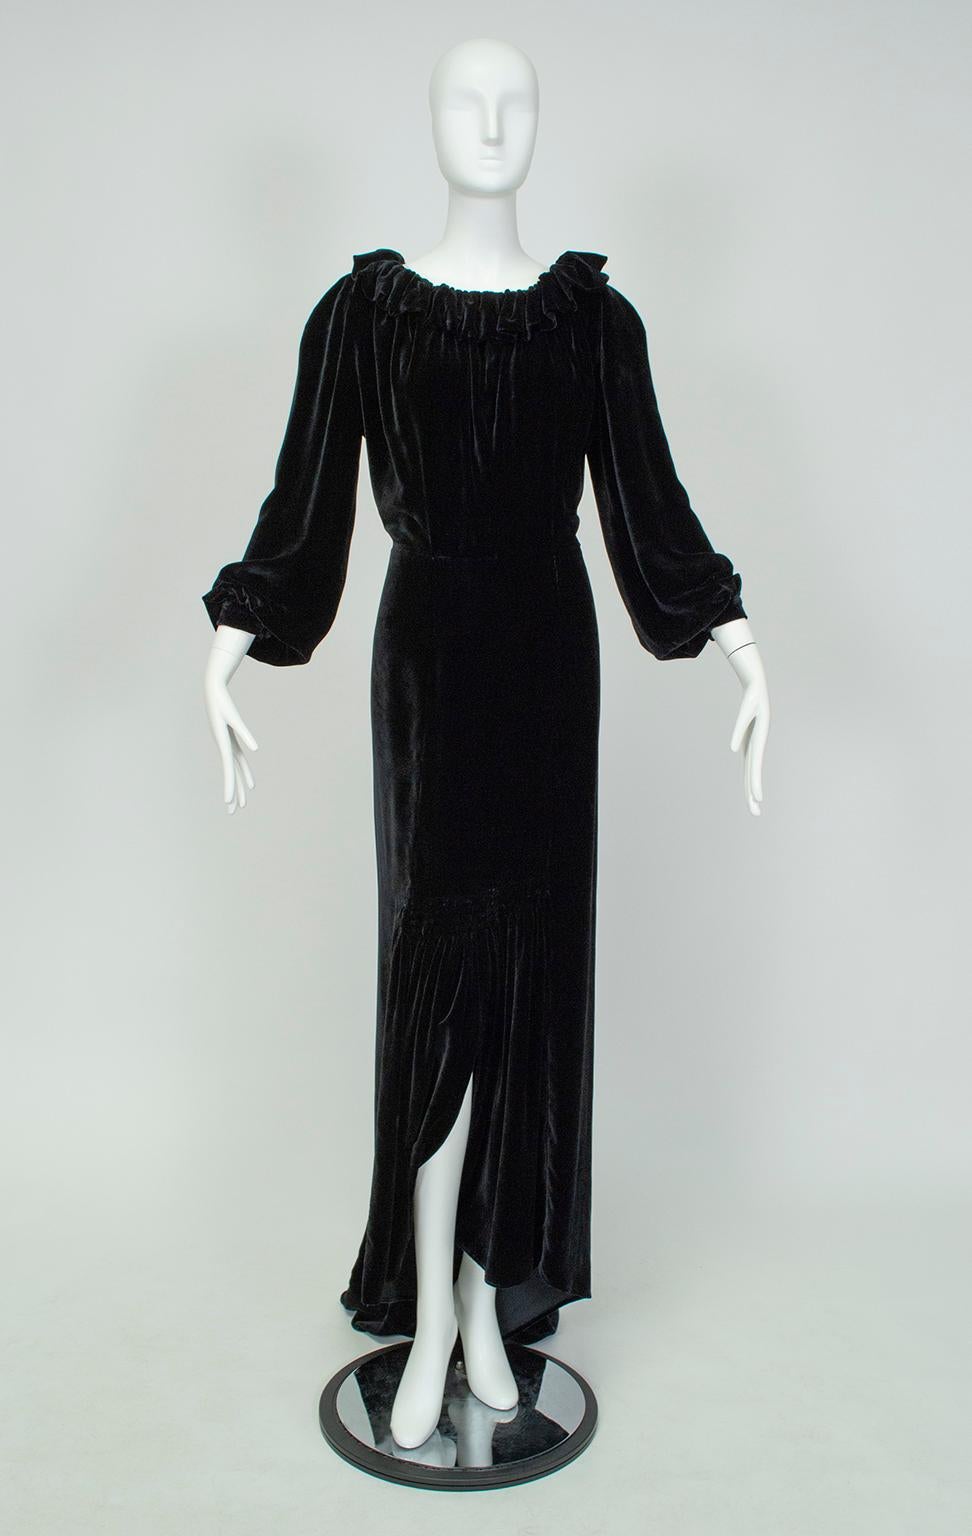 Eye catching for its liquid draping, open back and dramatic train, this gown is an unmistakable reminder of Hollywood’s Golden Age, when decency laws left designers scrambling for ways to outline the female form without simultaneously uncovering it.